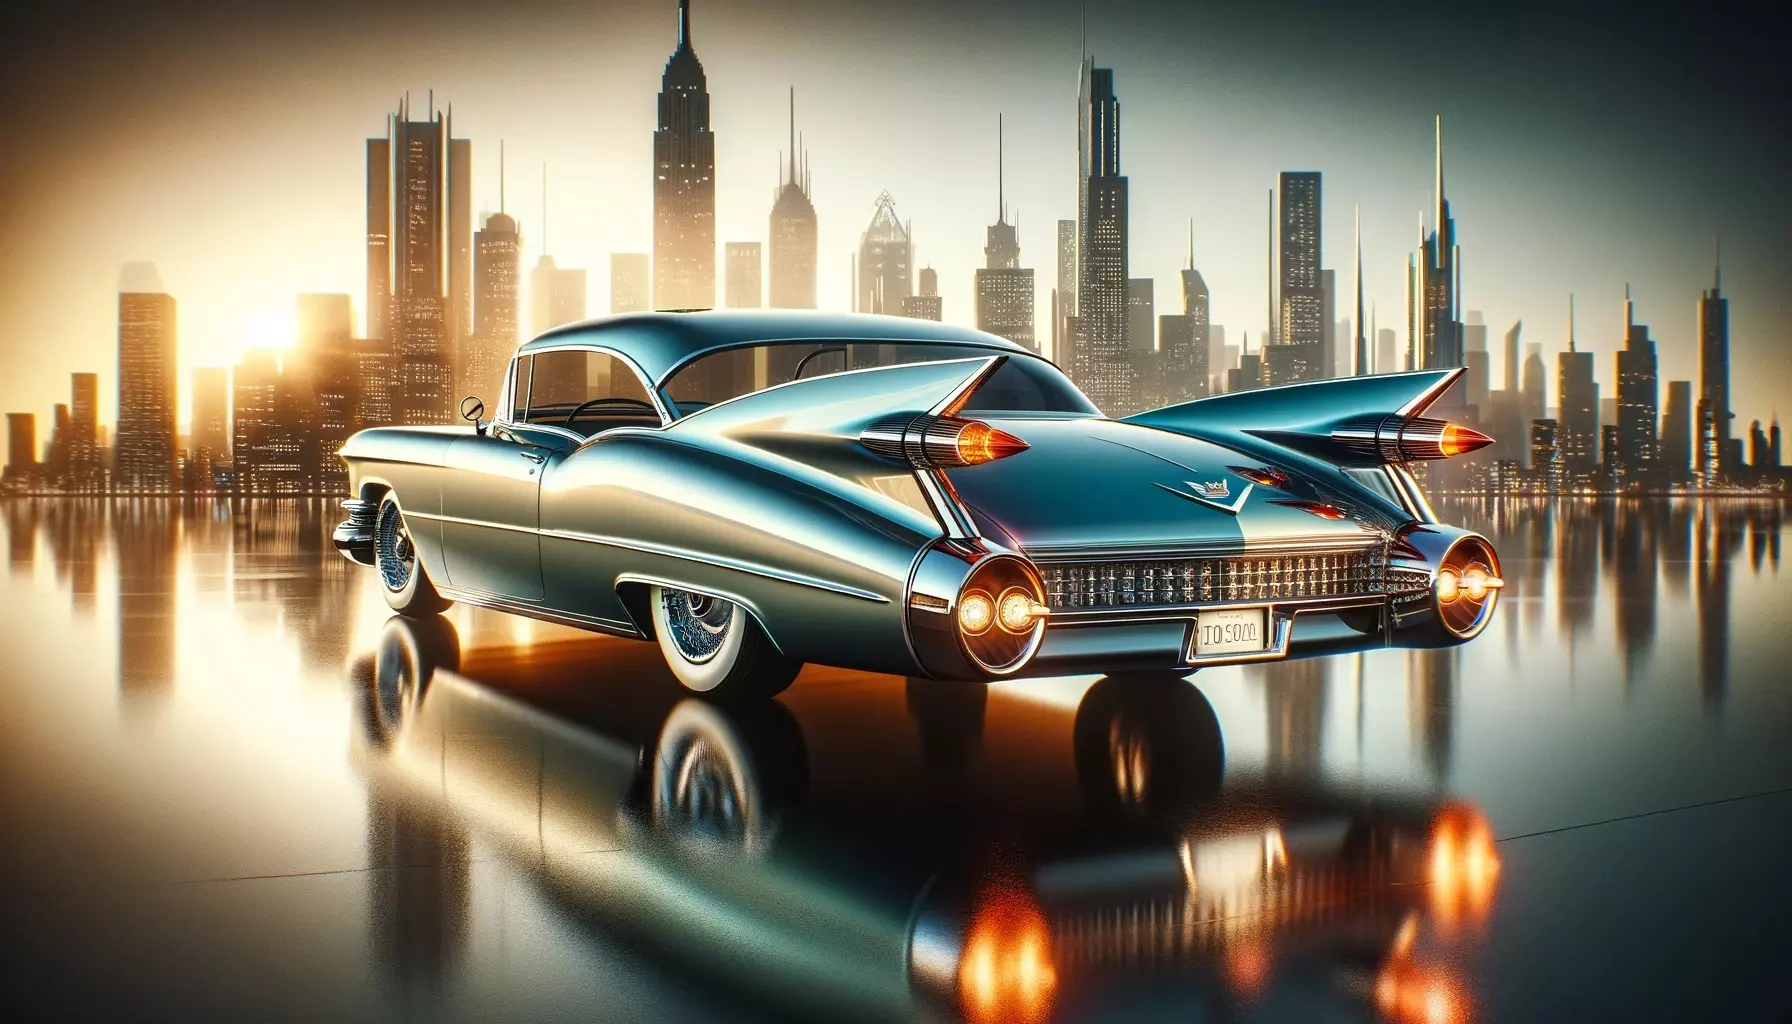 The Evolution of Car Design: 1920s to 1970s